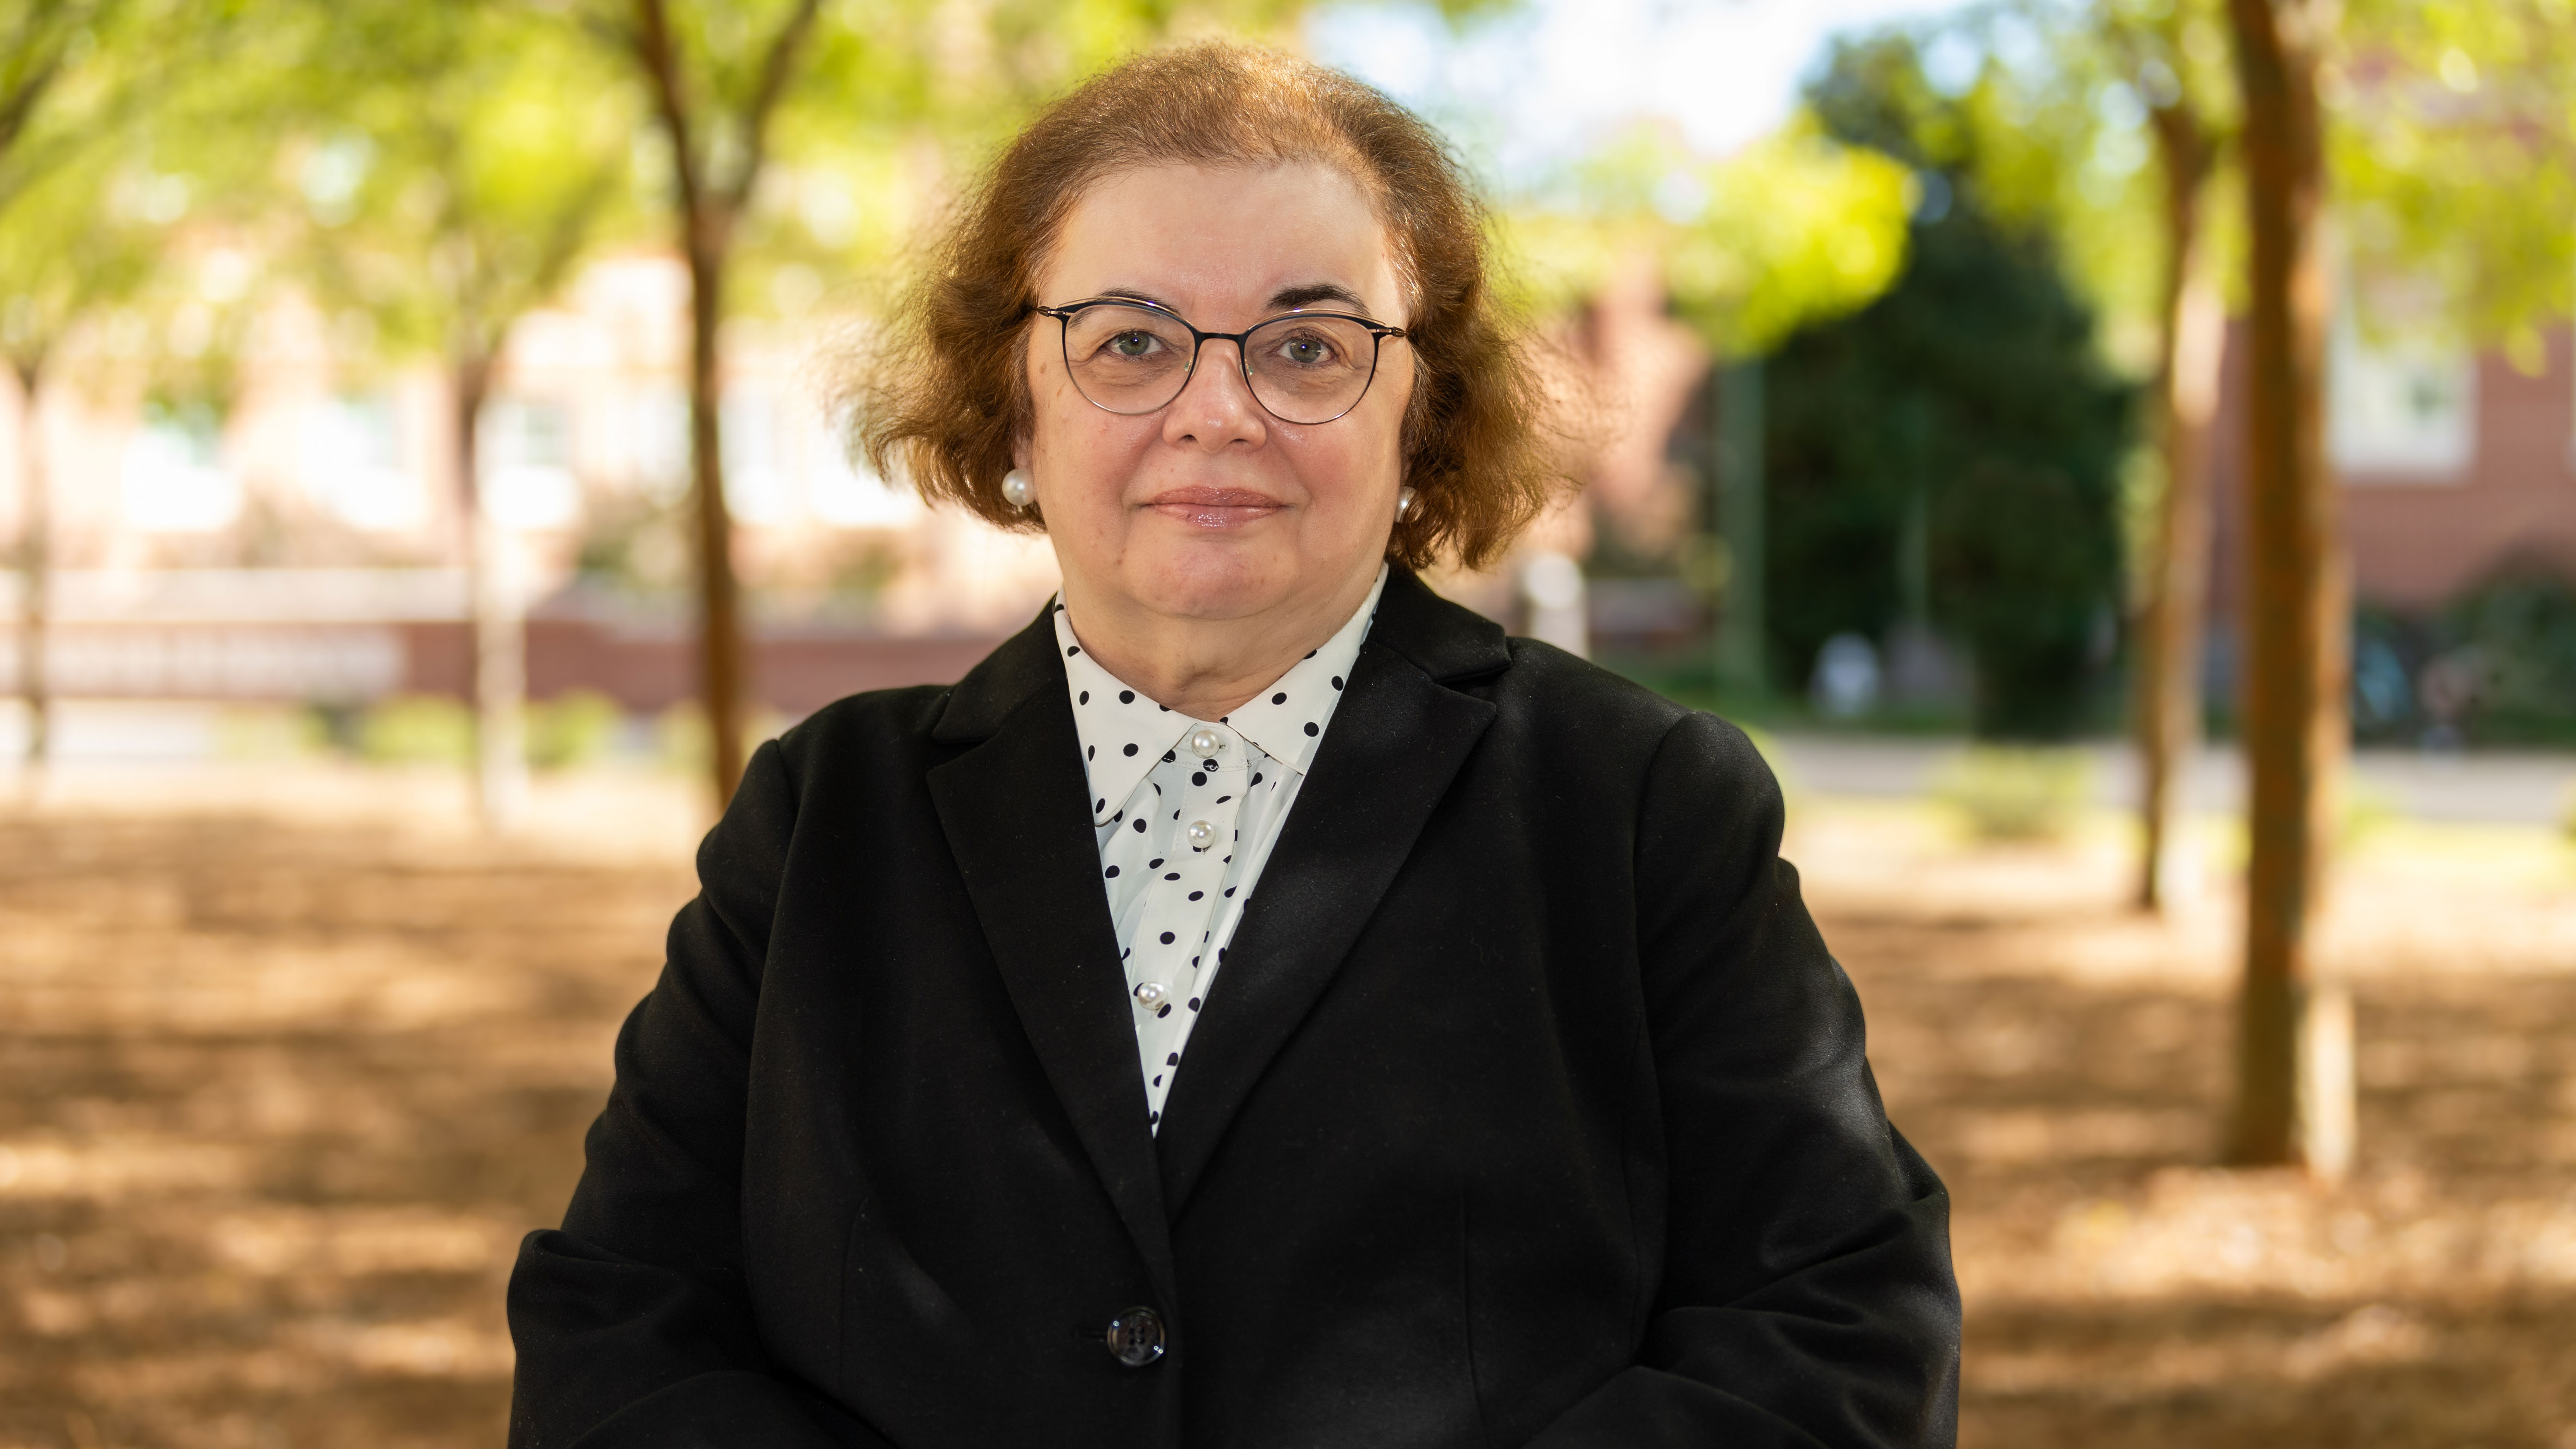 Daniela Marghitu was appointed on June 6 to the Governor's Advisory Council for Computer Science Education.